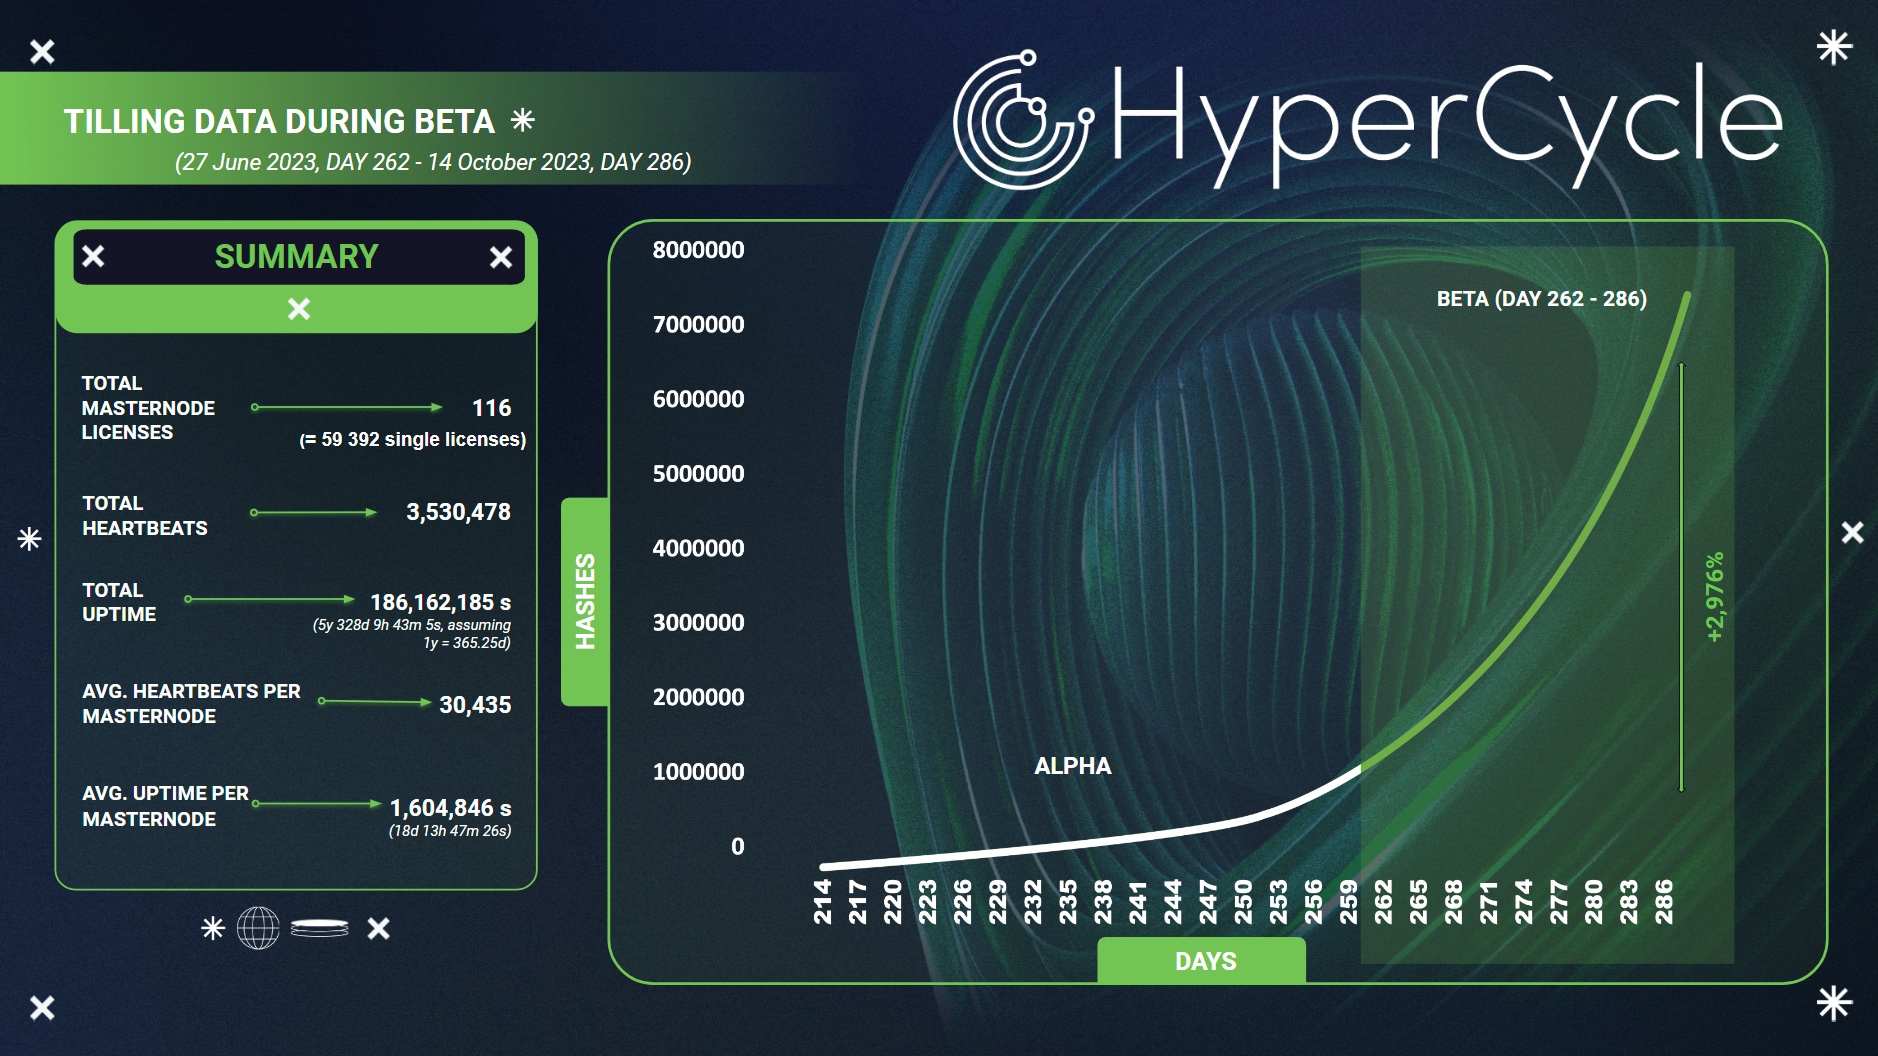 Since June 2023, HyperCycle’s network has been operational, scaling up as demand increases. Source: HyperCycle